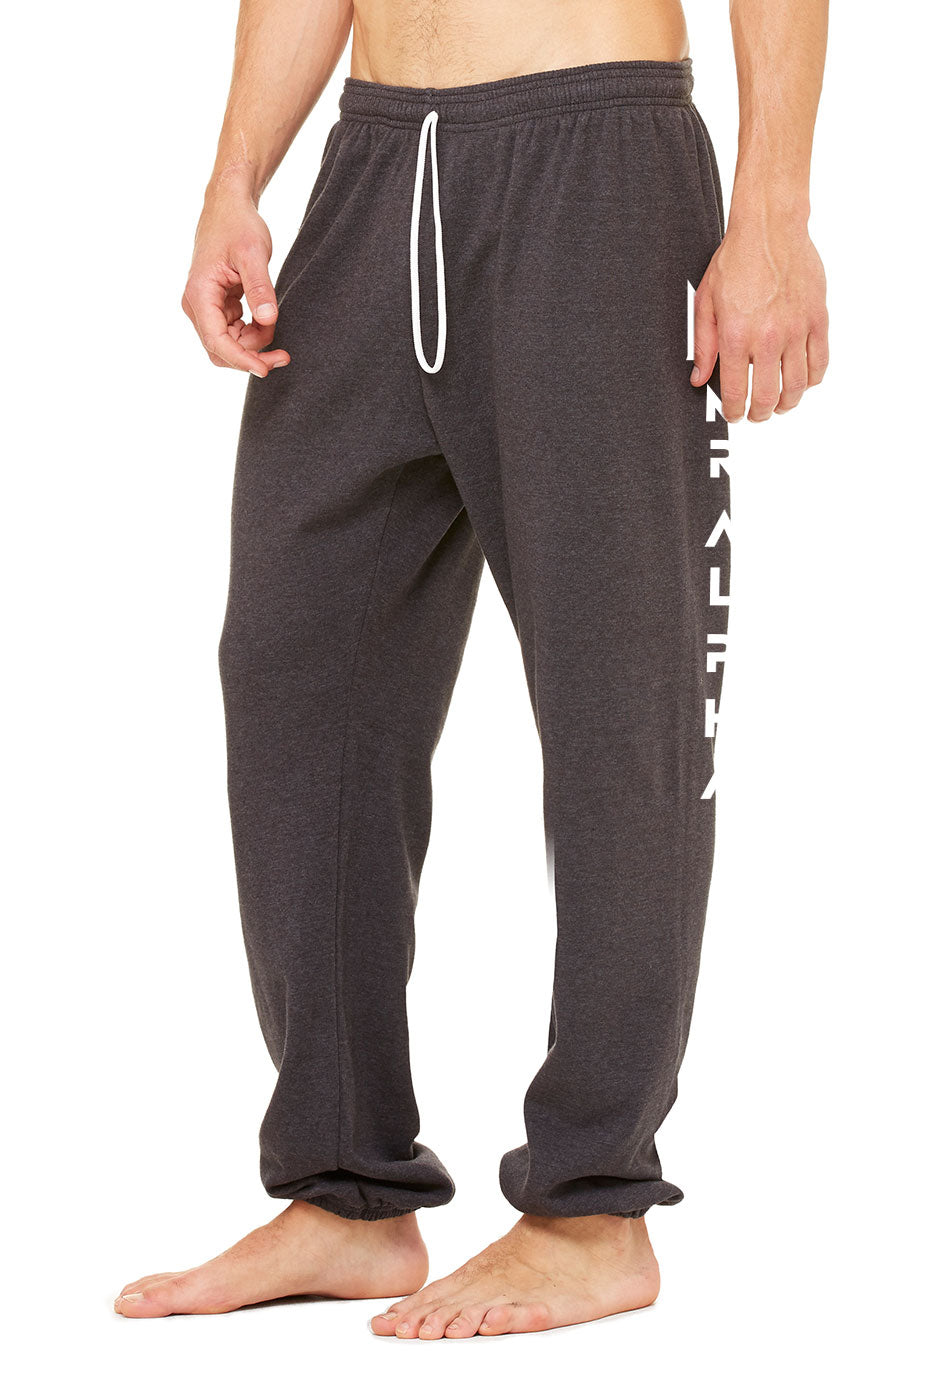 What Are Sweatpants With Elastic Ankles Called? – solowomen